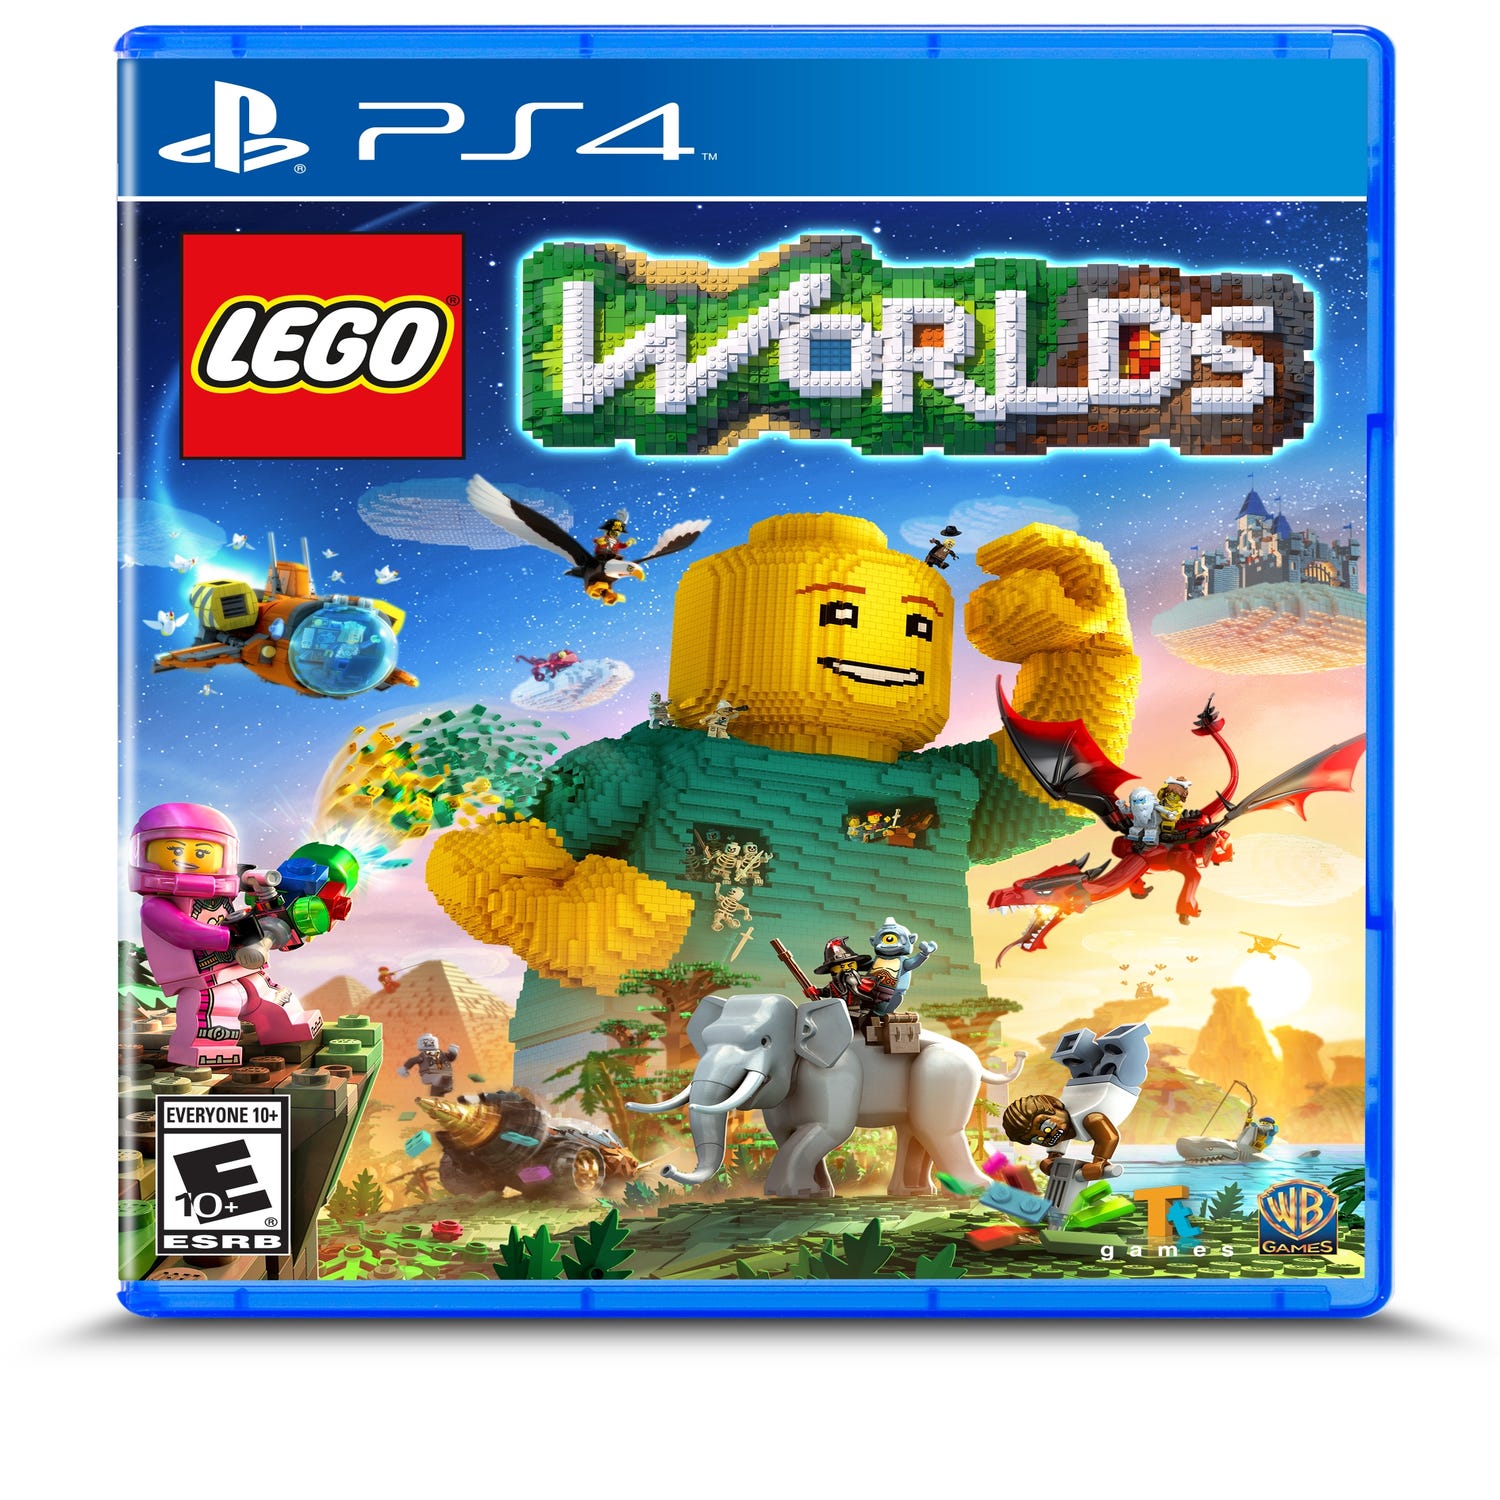 lego-worlds-playstation-4-video-game-5005366-classic-buy-online-at-the-official-lego-shop-us